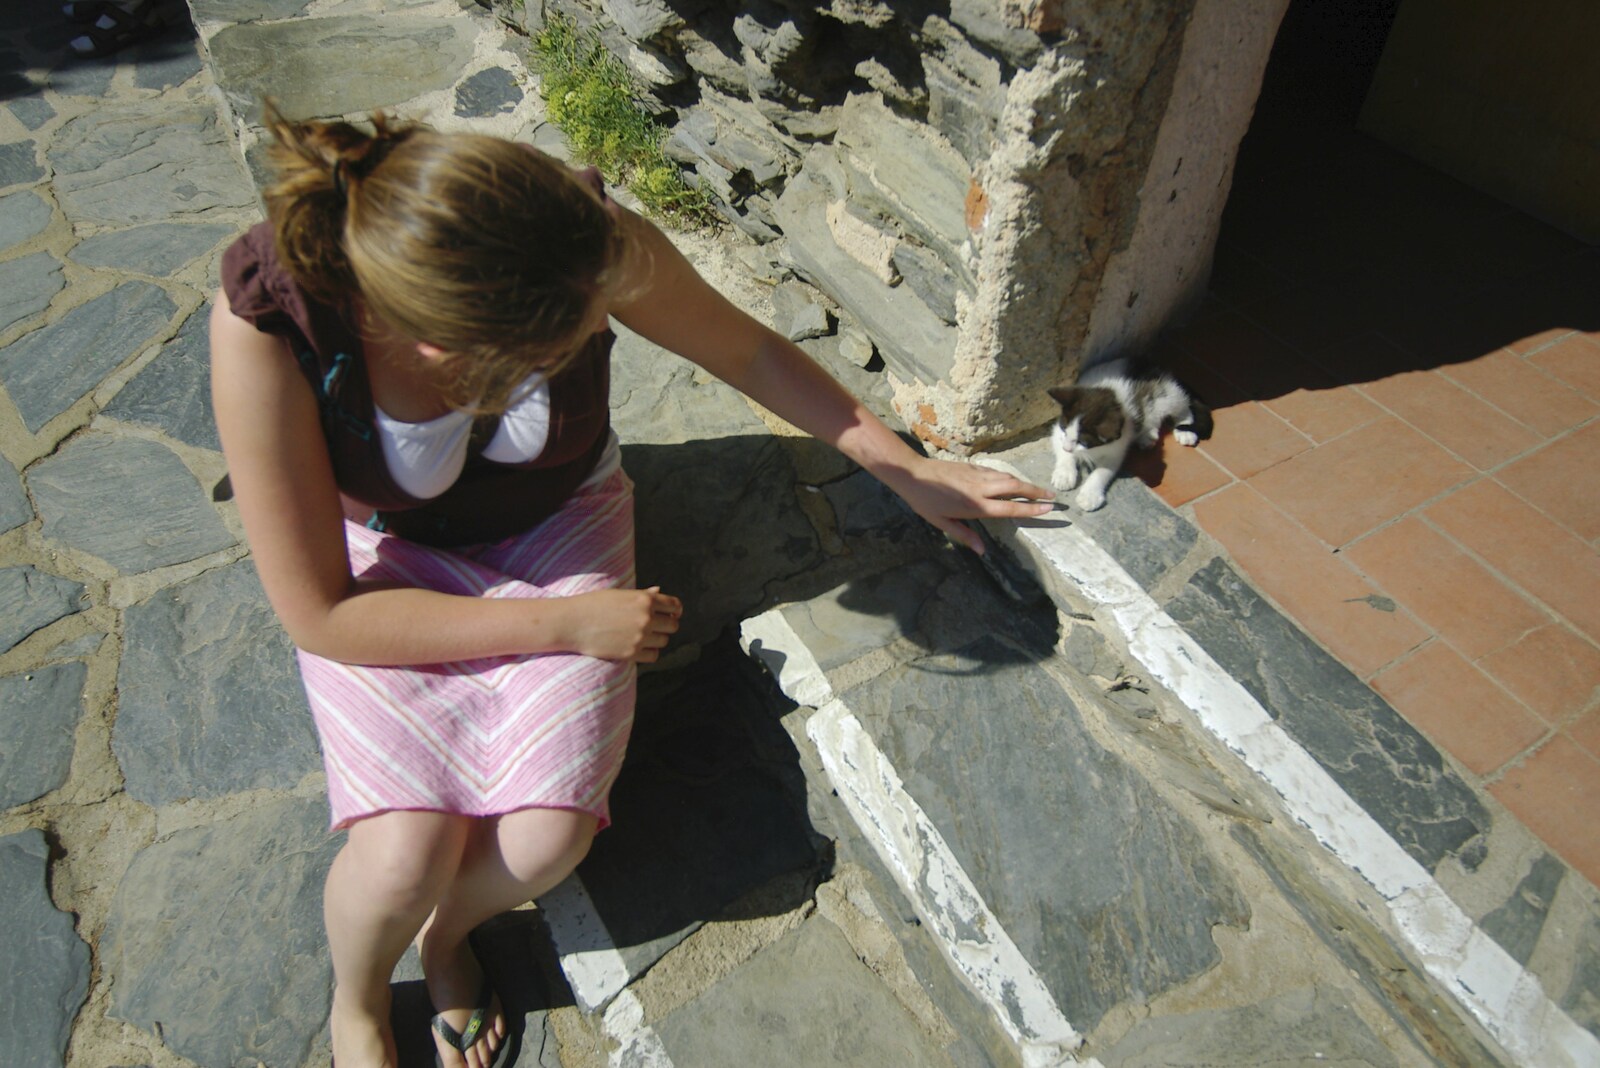 Isobel plays with a kitten from Salvador Dalí's House, Port Lligat, Spain - 19th Deptember 2006